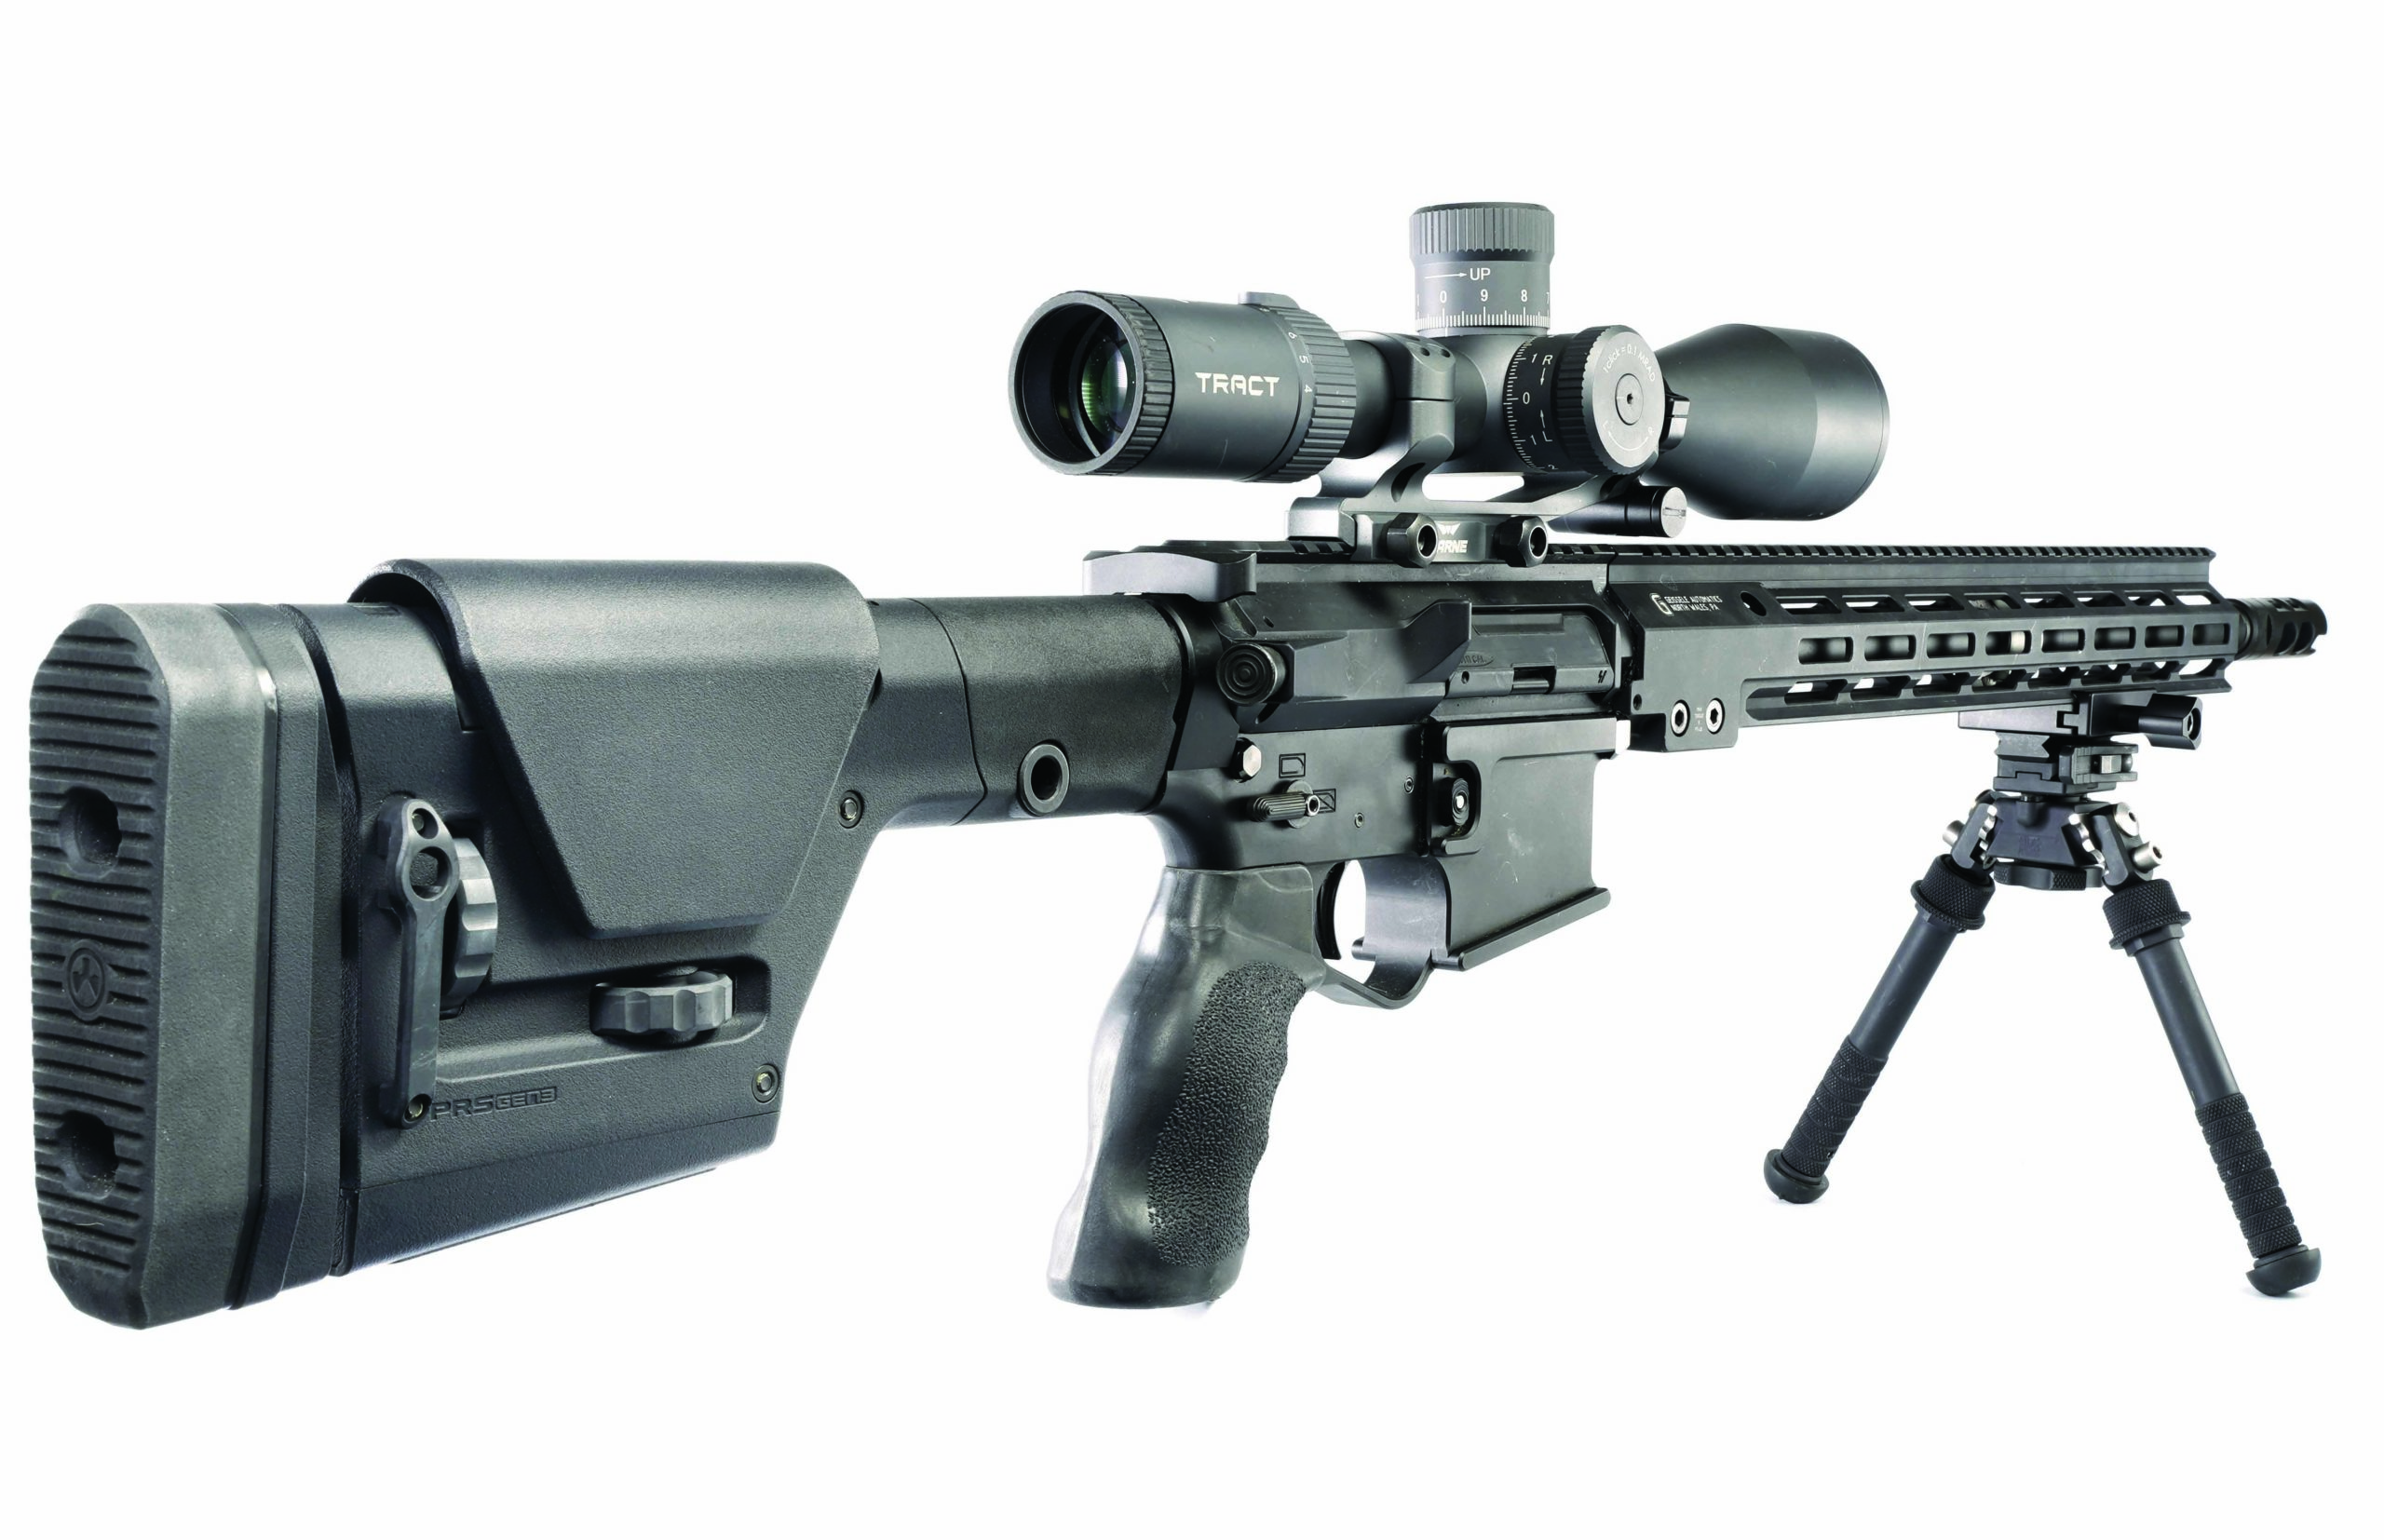 An 18-inch DMR rifle would make a less-than-ideal home-defense rifle, but it’s great at distance.